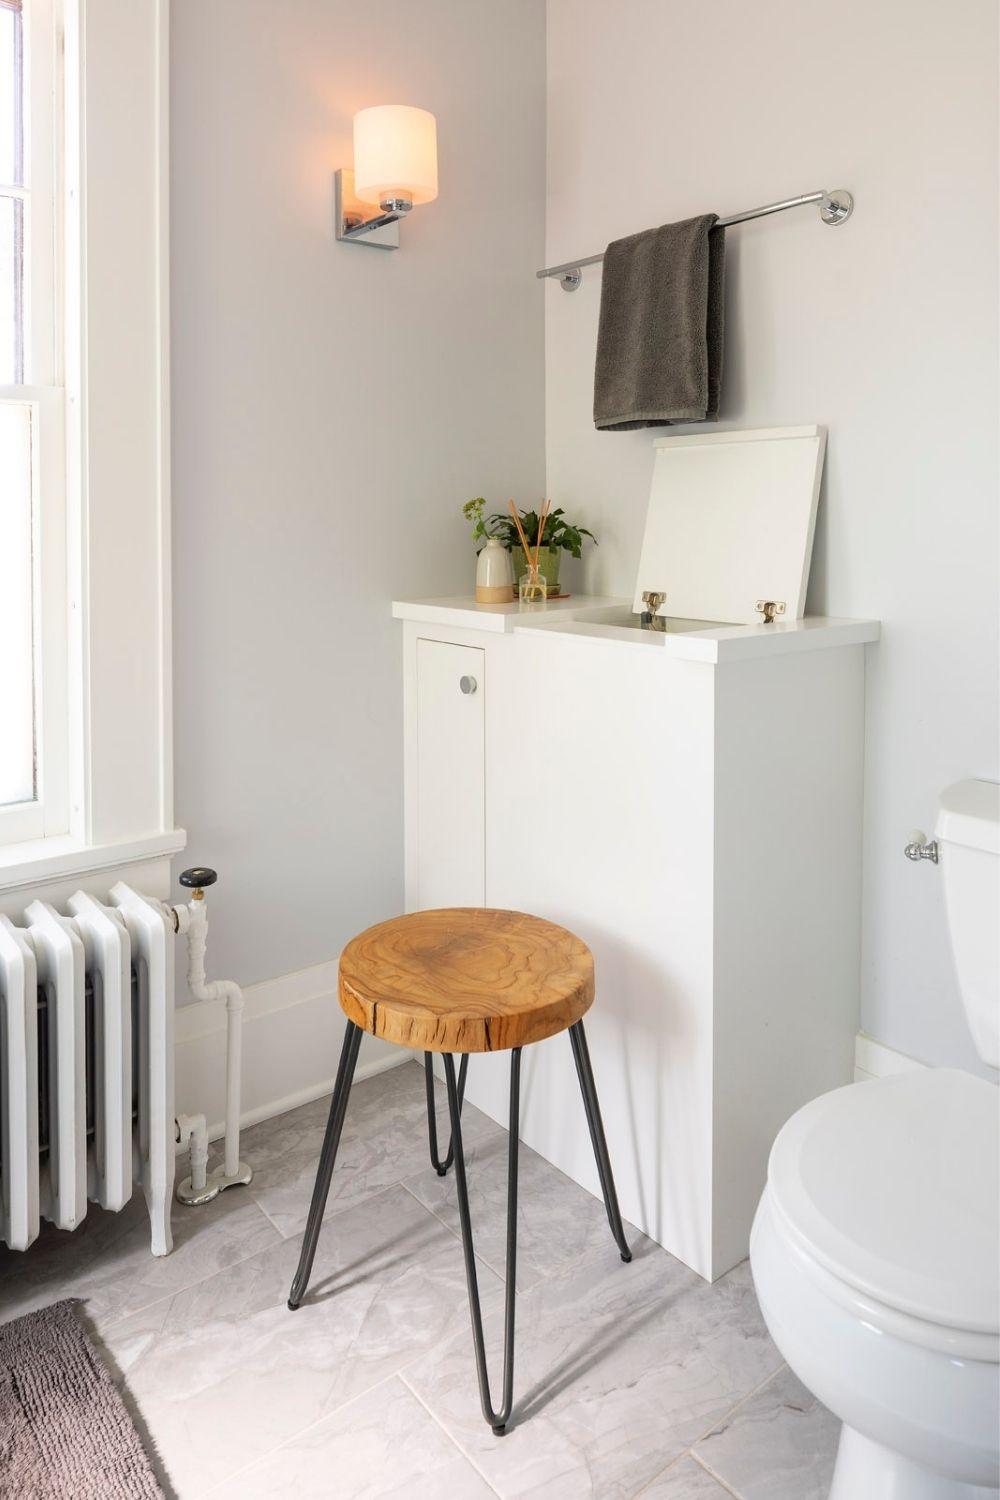 laundry chute opened with small stool